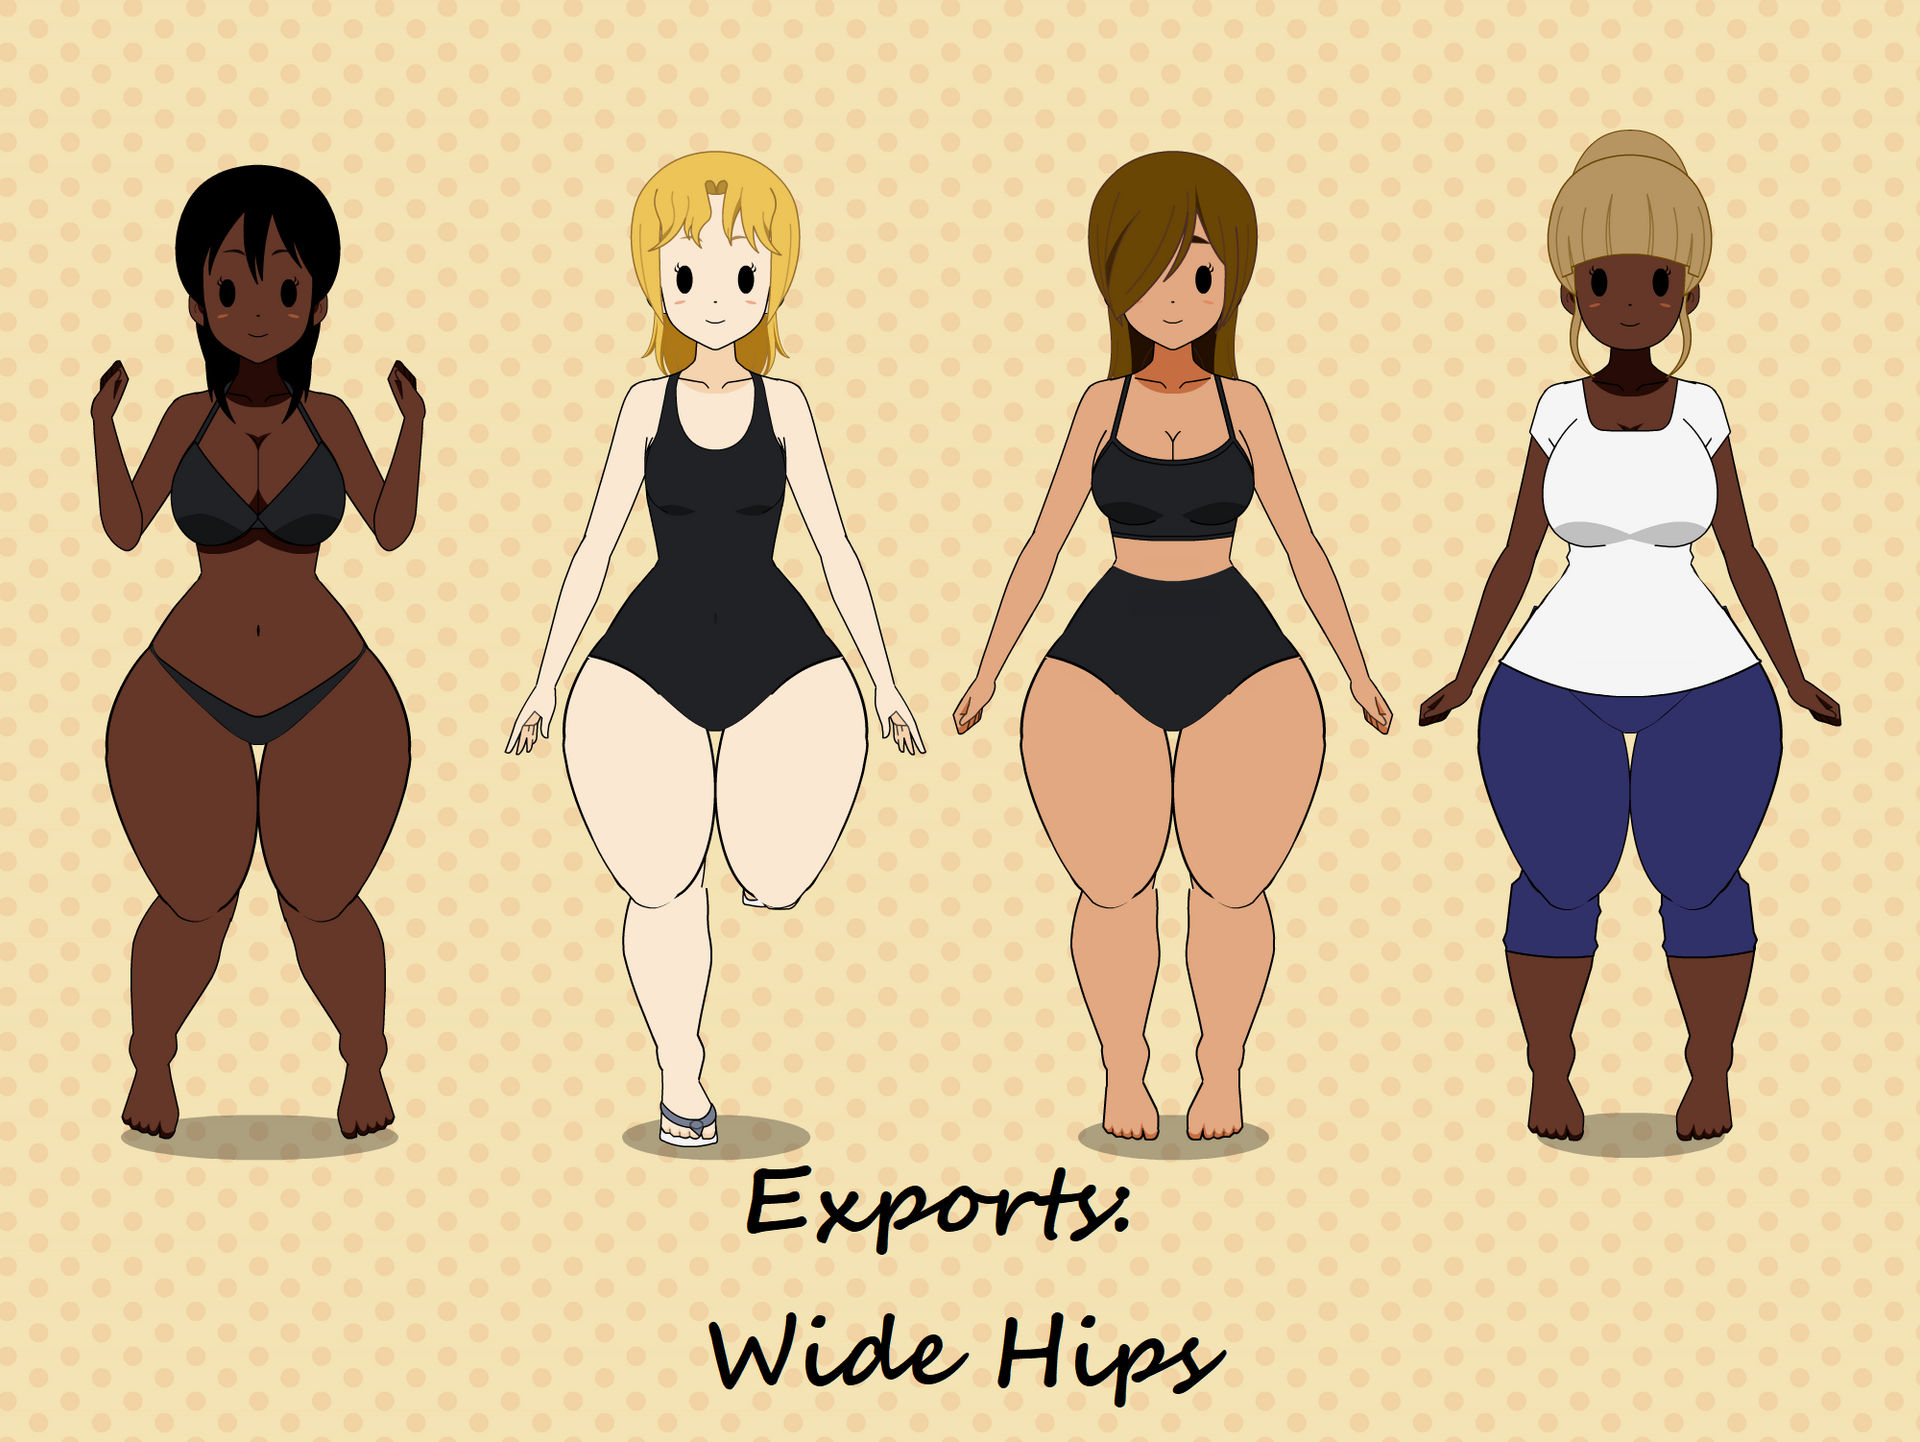 Exports: Wide Hips by PizzaBurgers on DeviantArt